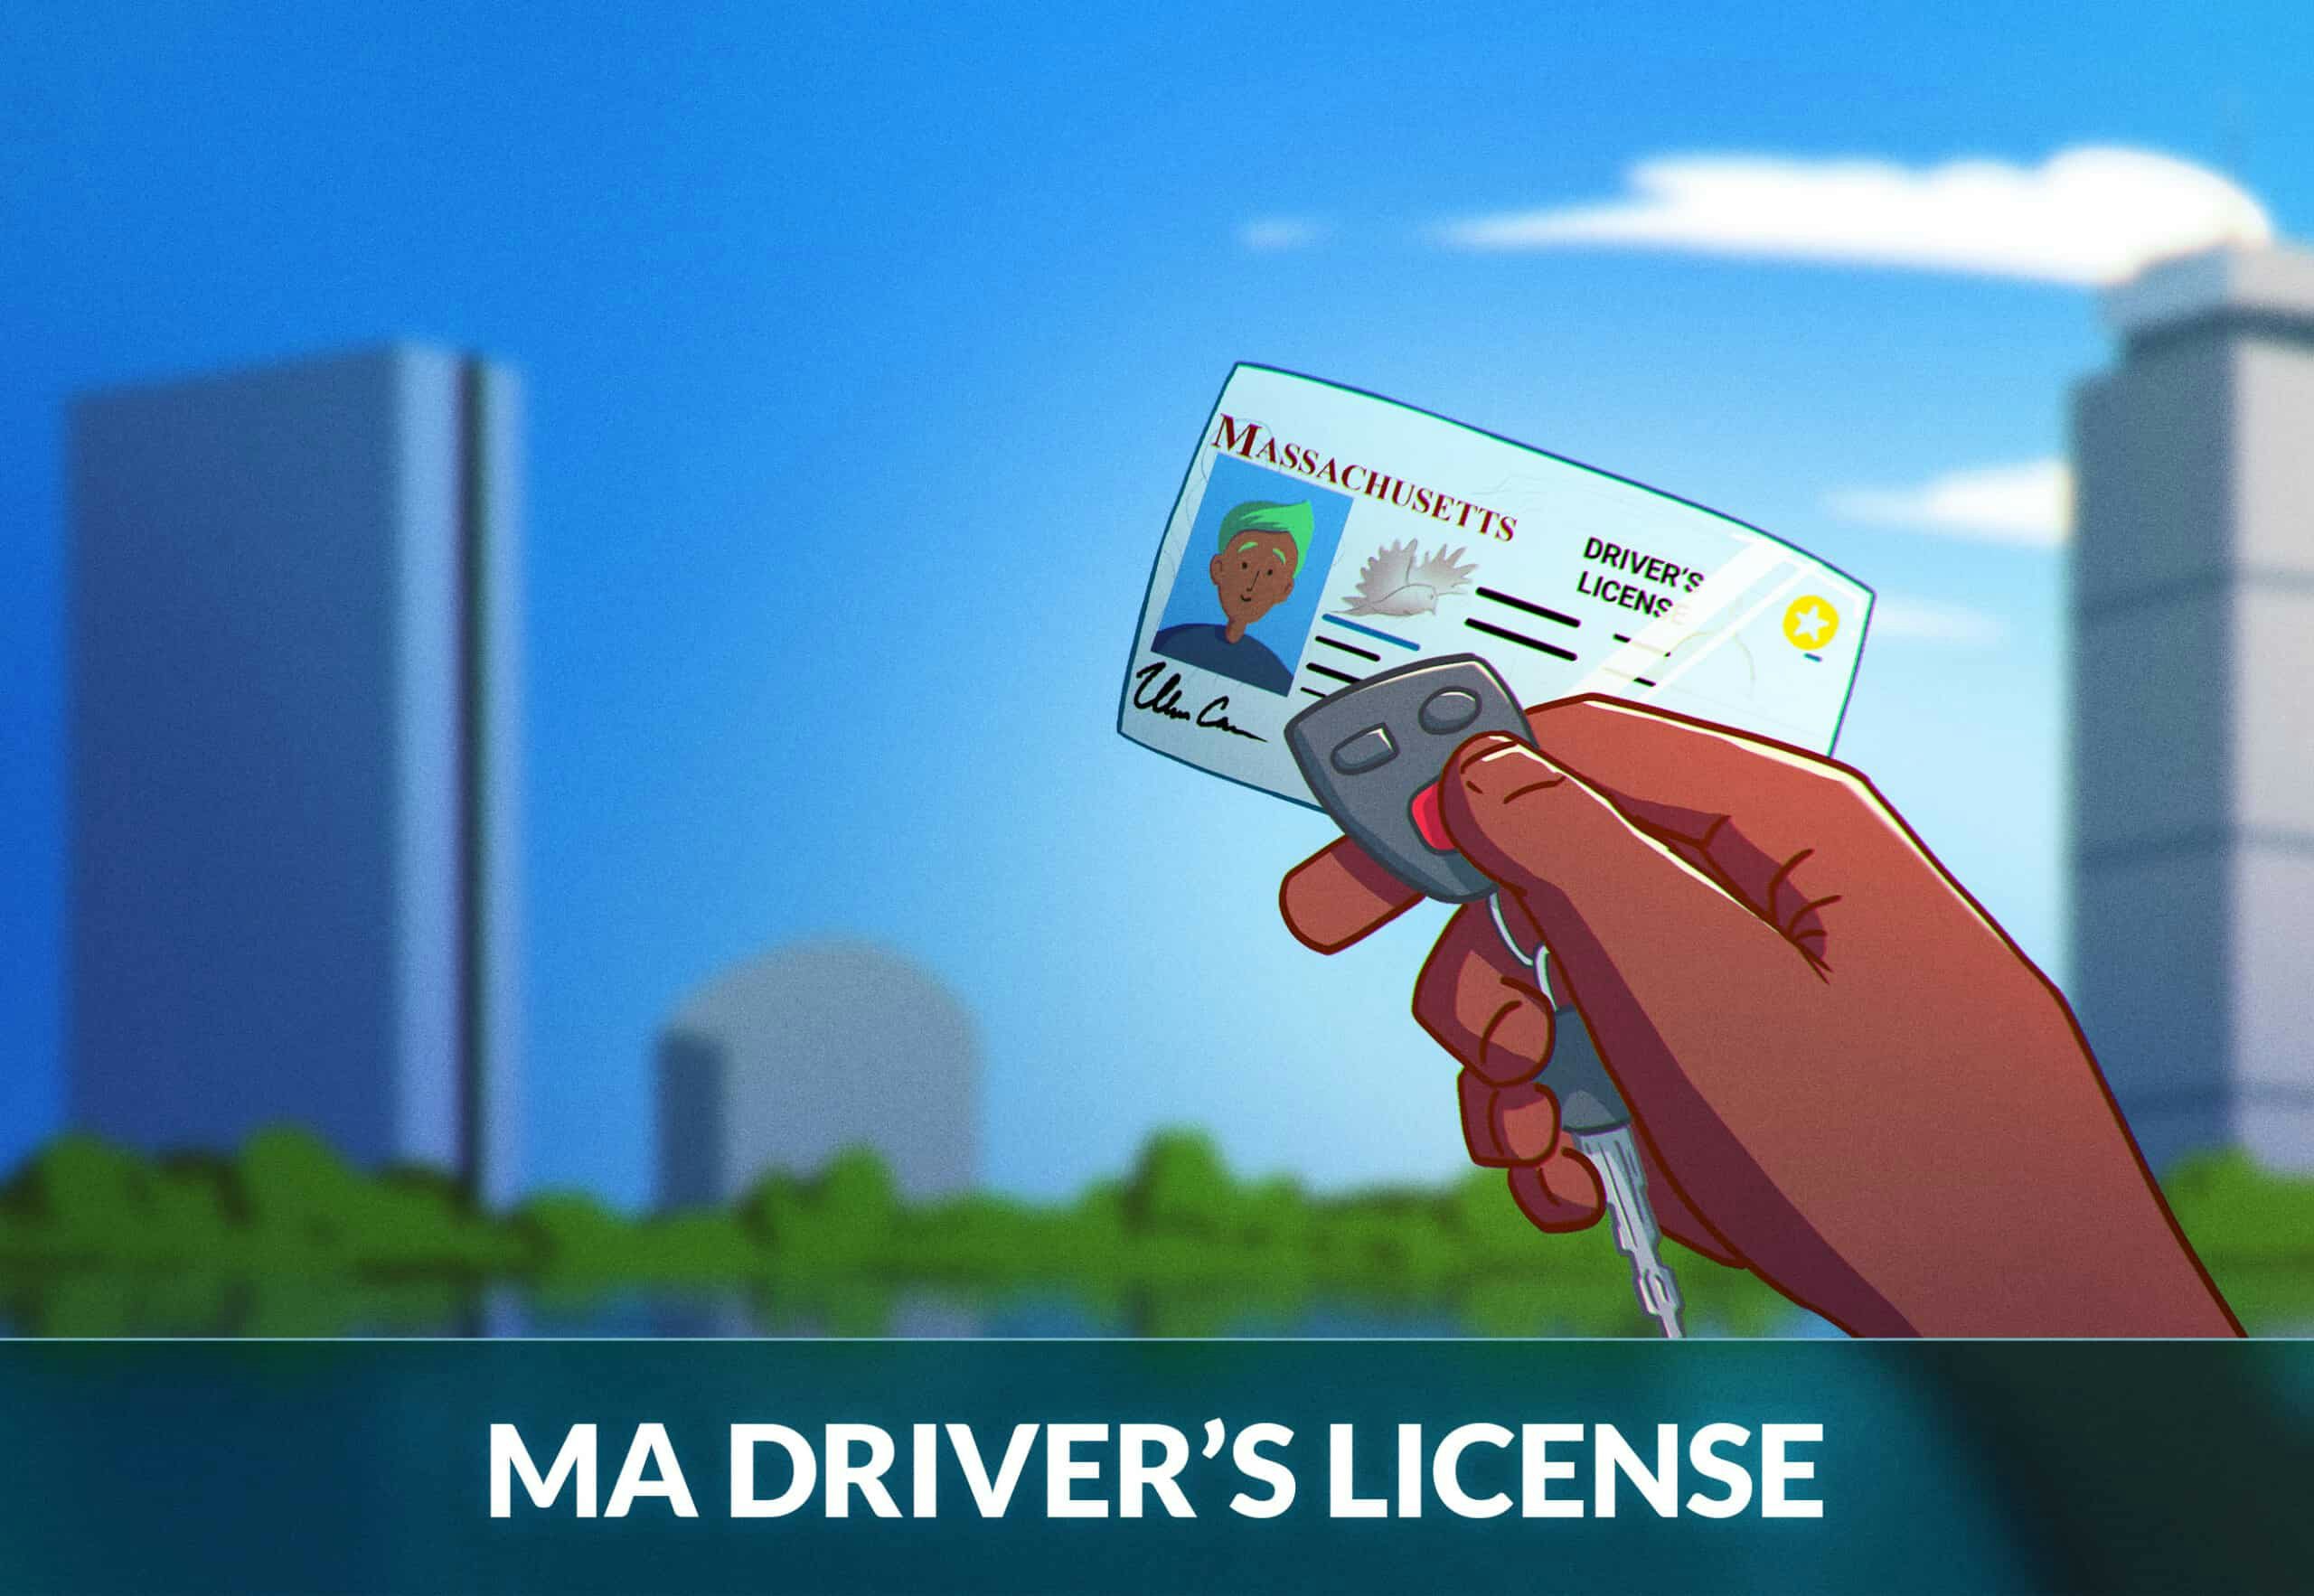 Get Web Based Drivers License Renewal in Massachusetts